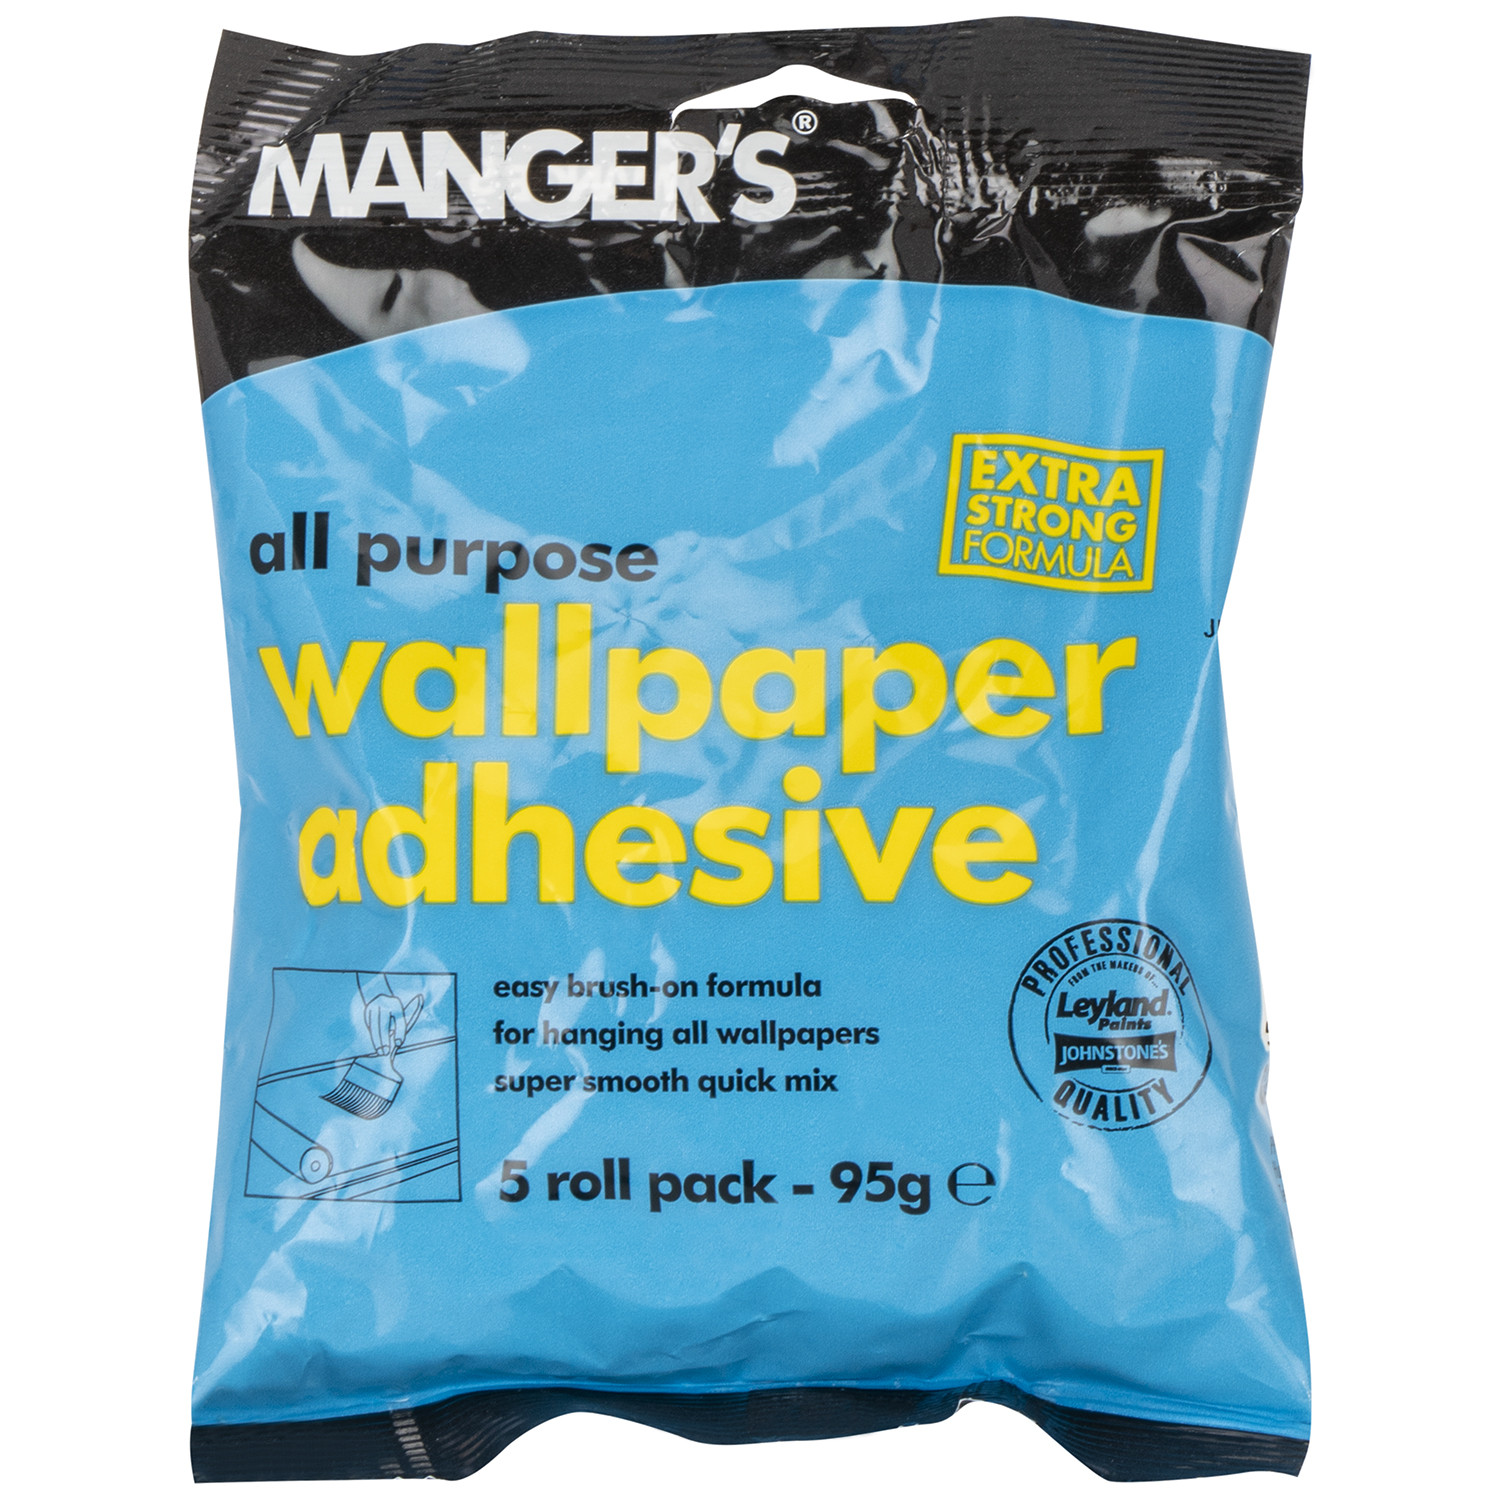 Managers All Purpose Wallpaper Adhesive 5 Rolls Image